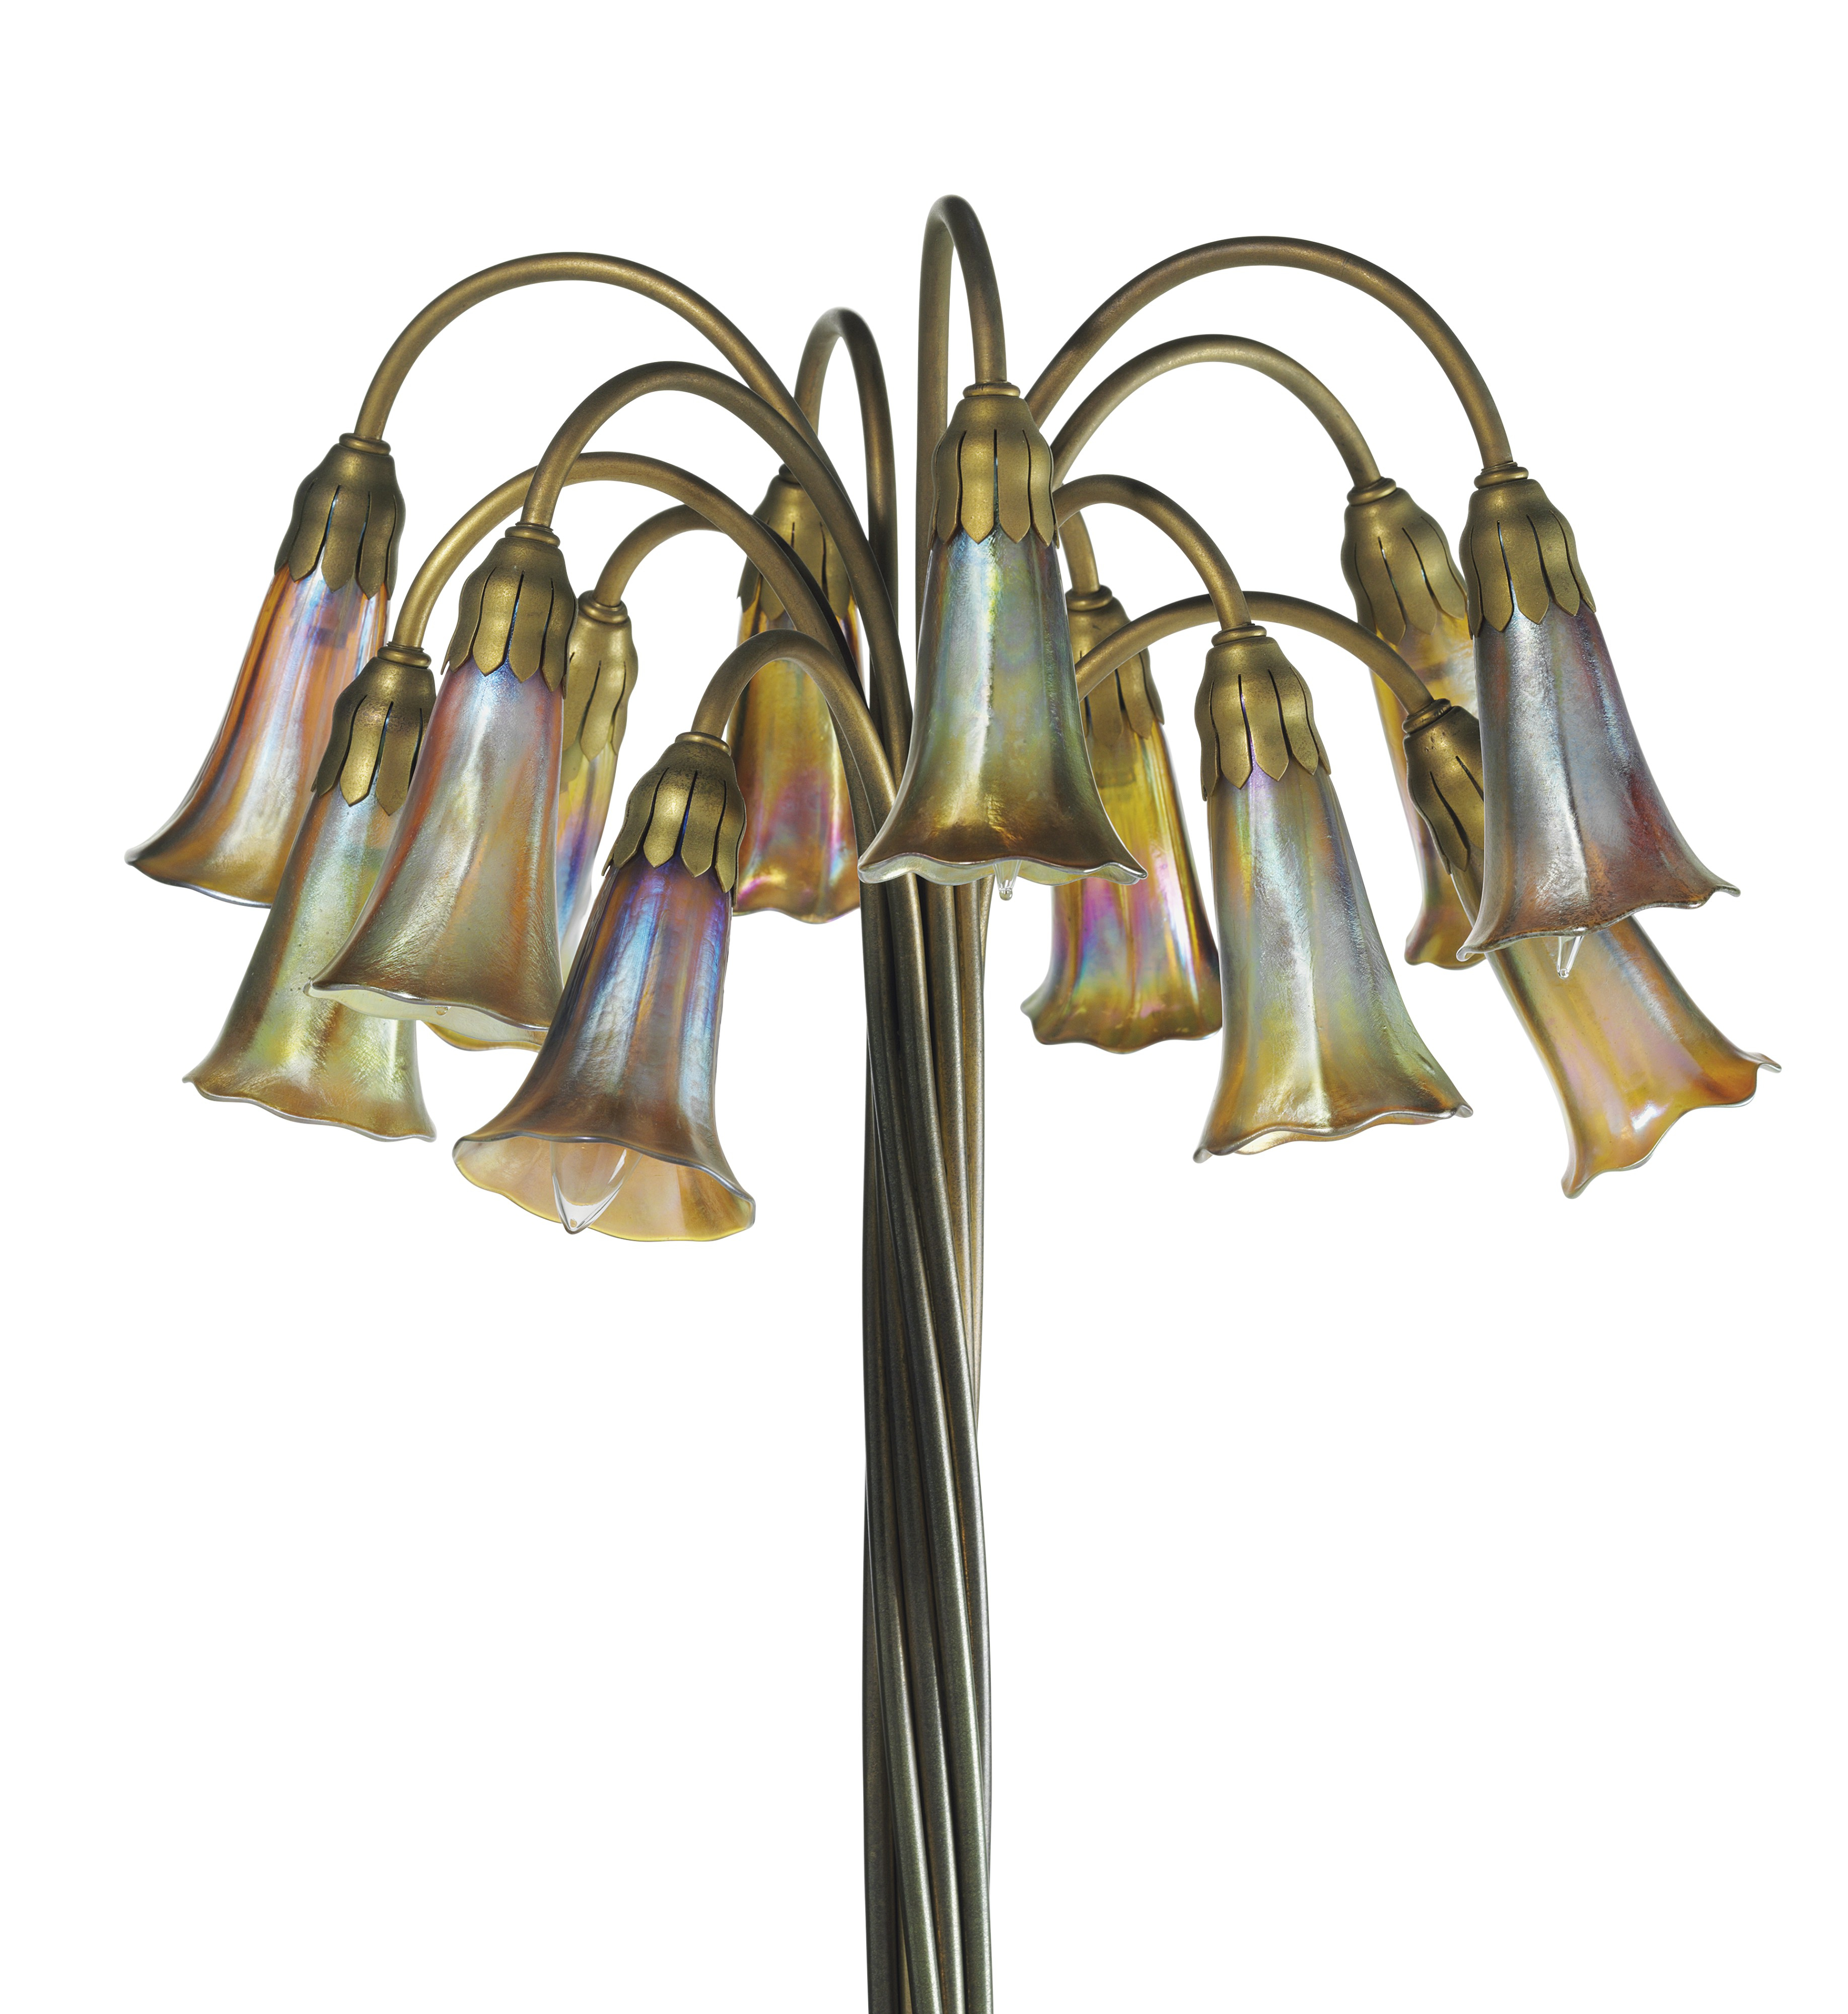 Tiffany Studios A Twelve Light Lily Floor Lamp Circa intended for sizing 3670 X 4000